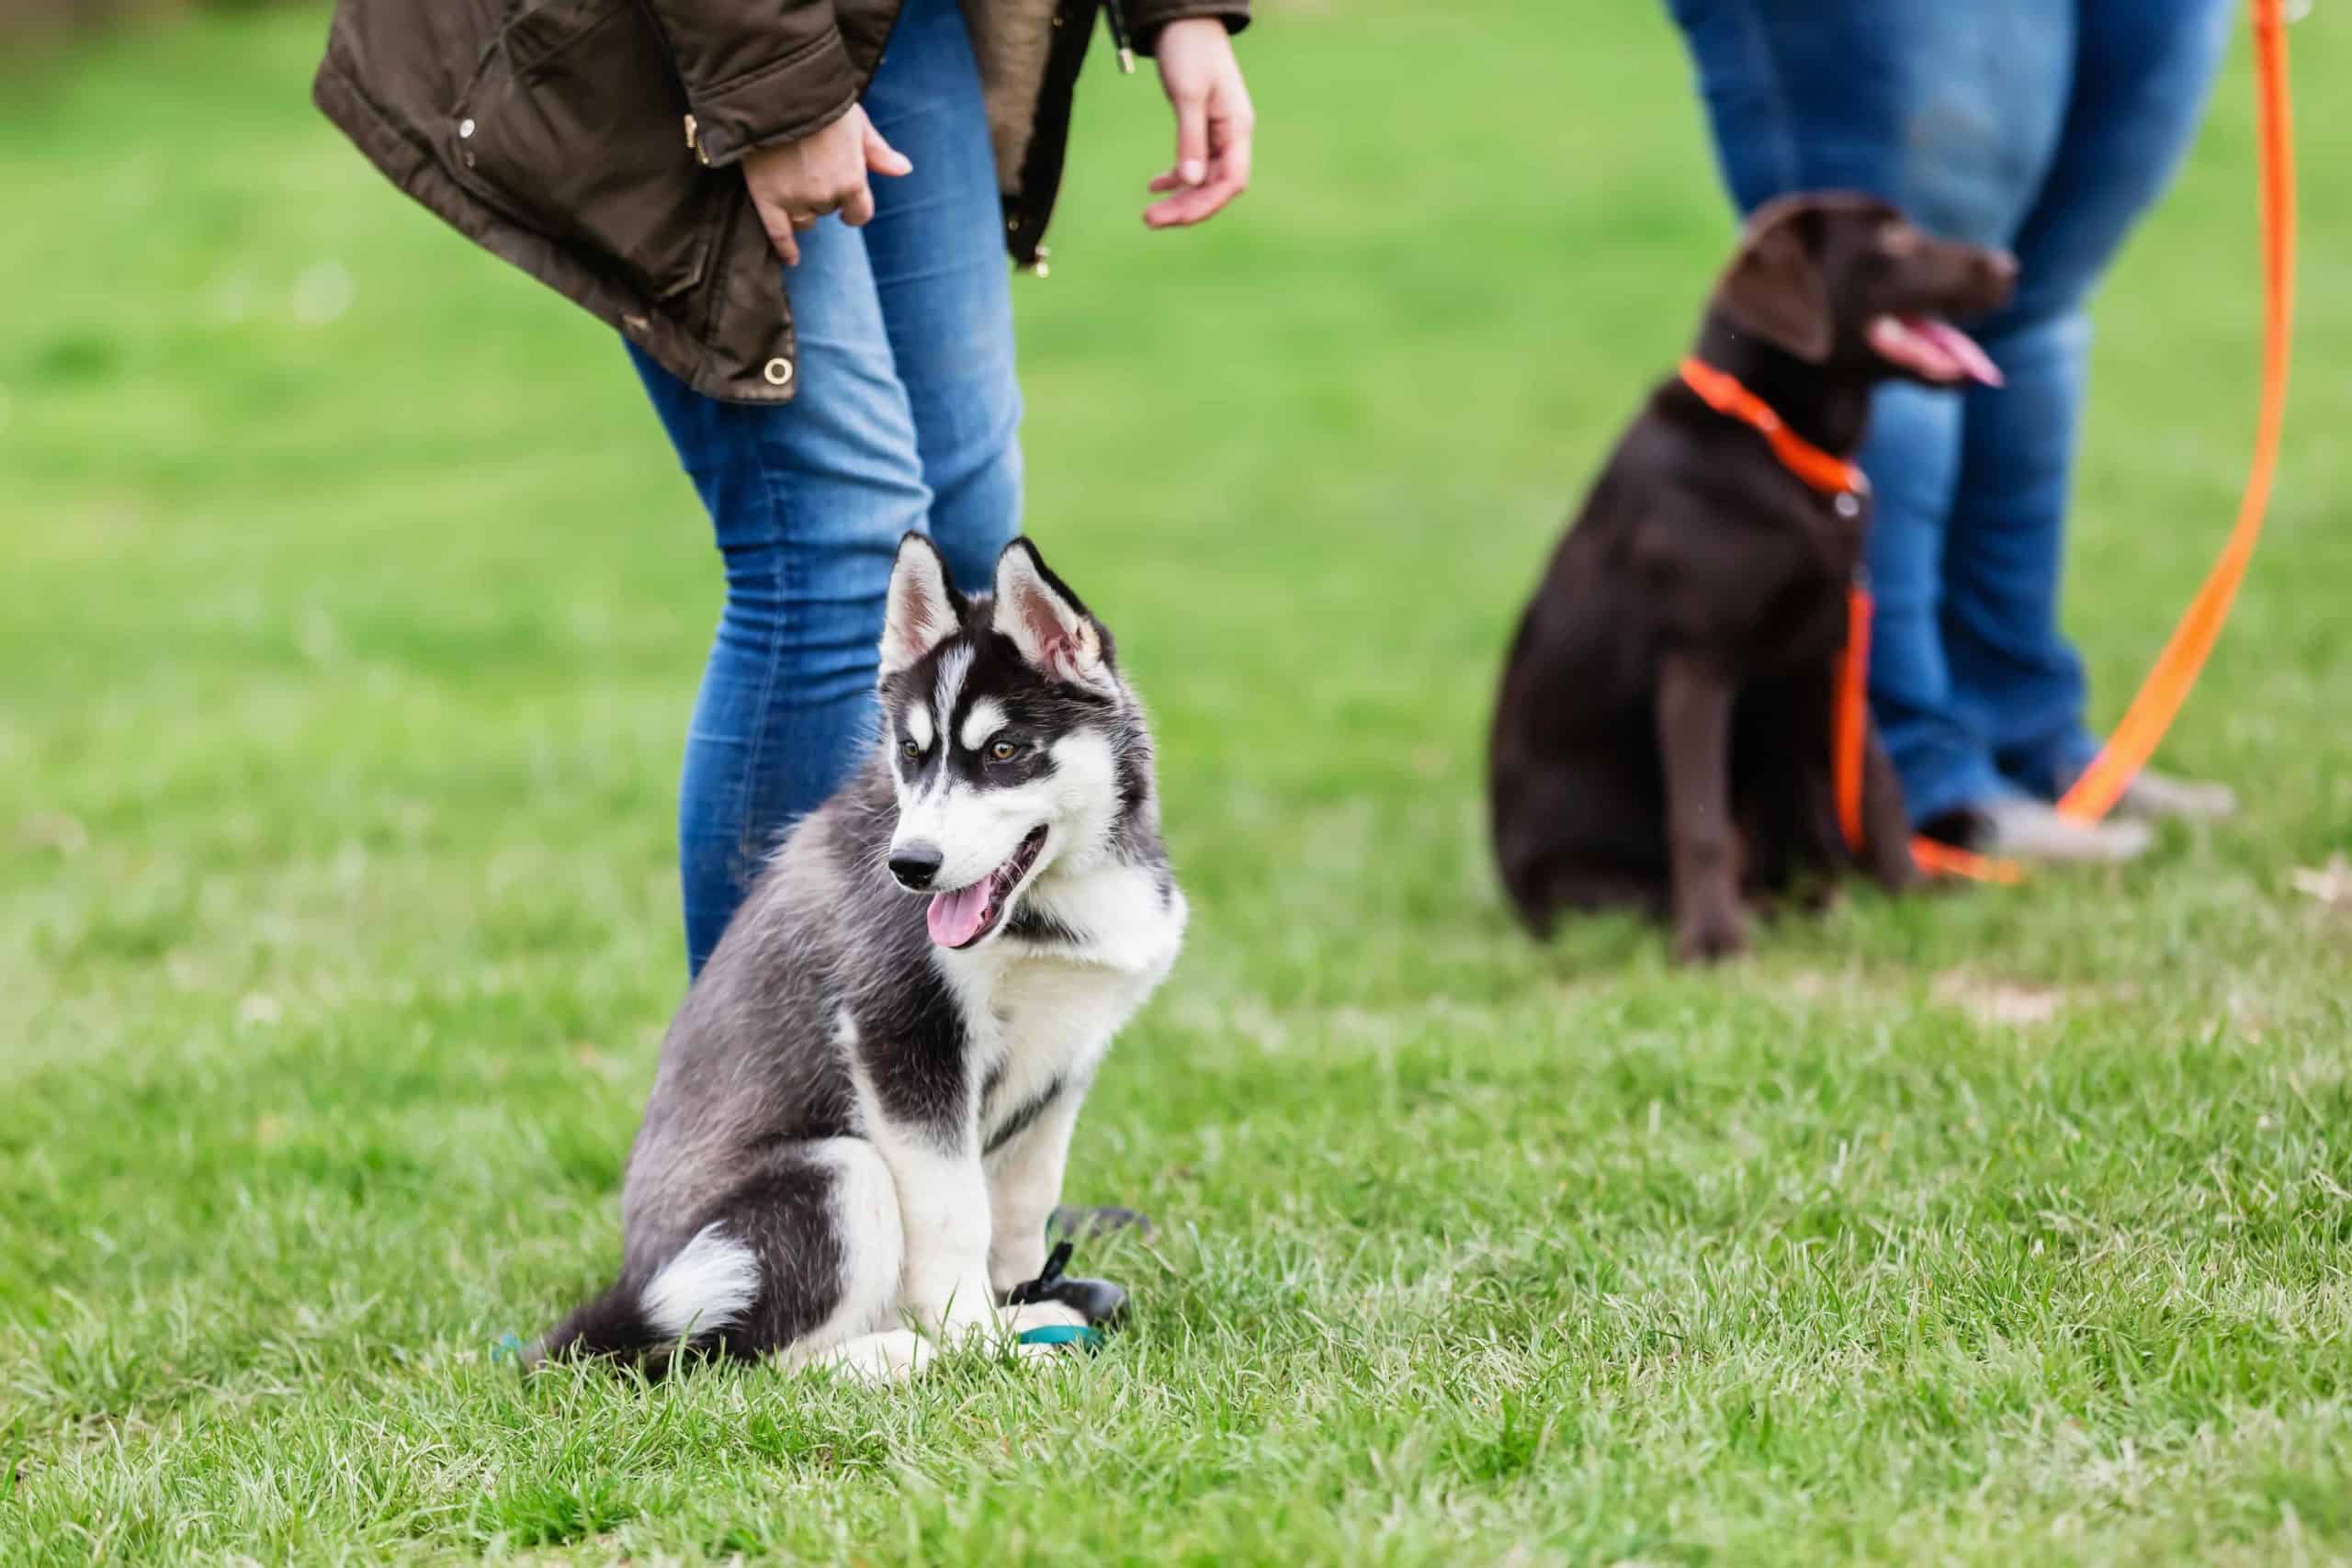 Owner trains Husky puppy at a dog training class. If you are a new dog owner, it's important to train your dog, so be sure to focus on teaching puppy manners.